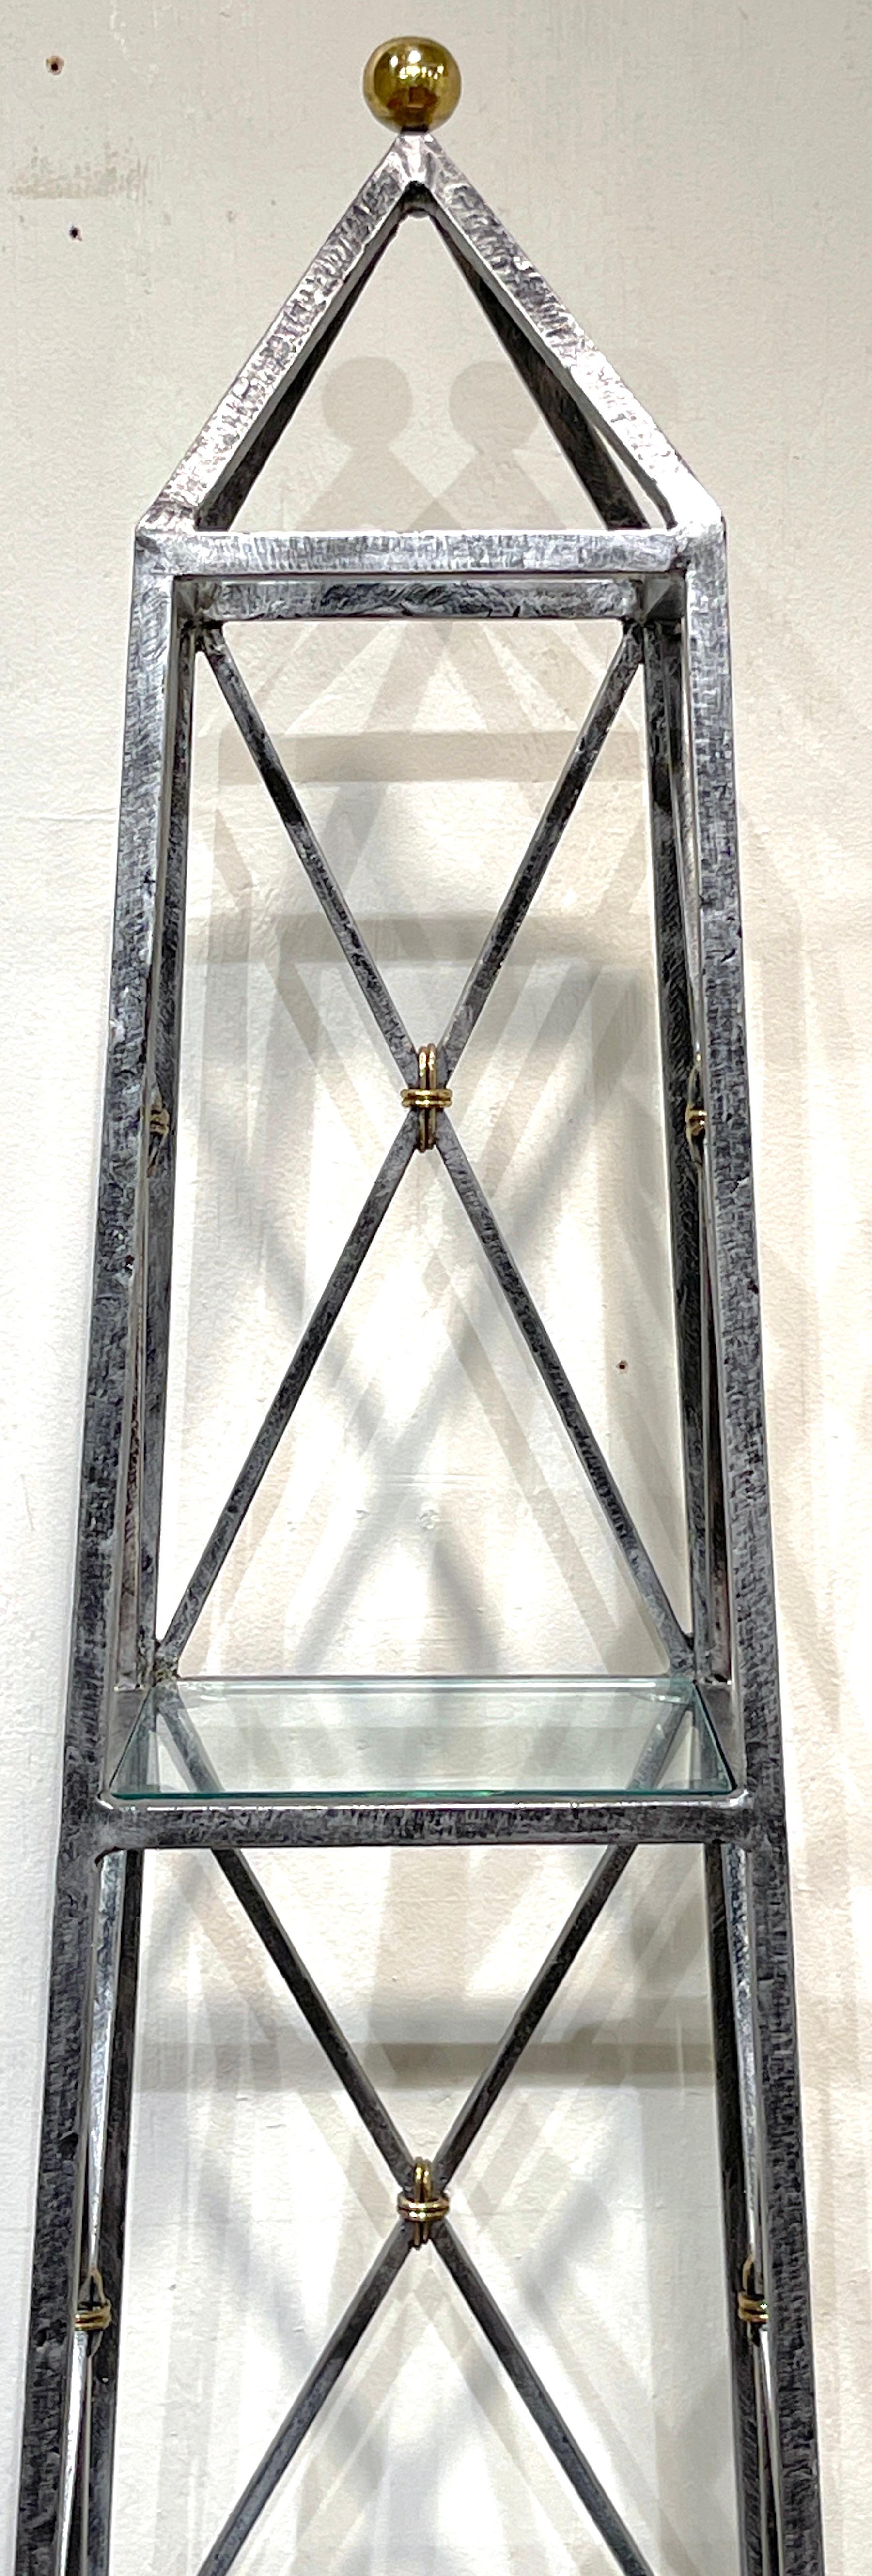 Italian Neoclassical Wrought Iron & Brass Obelisk Etagere  In Good Condition For Sale In West Palm Beach, FL